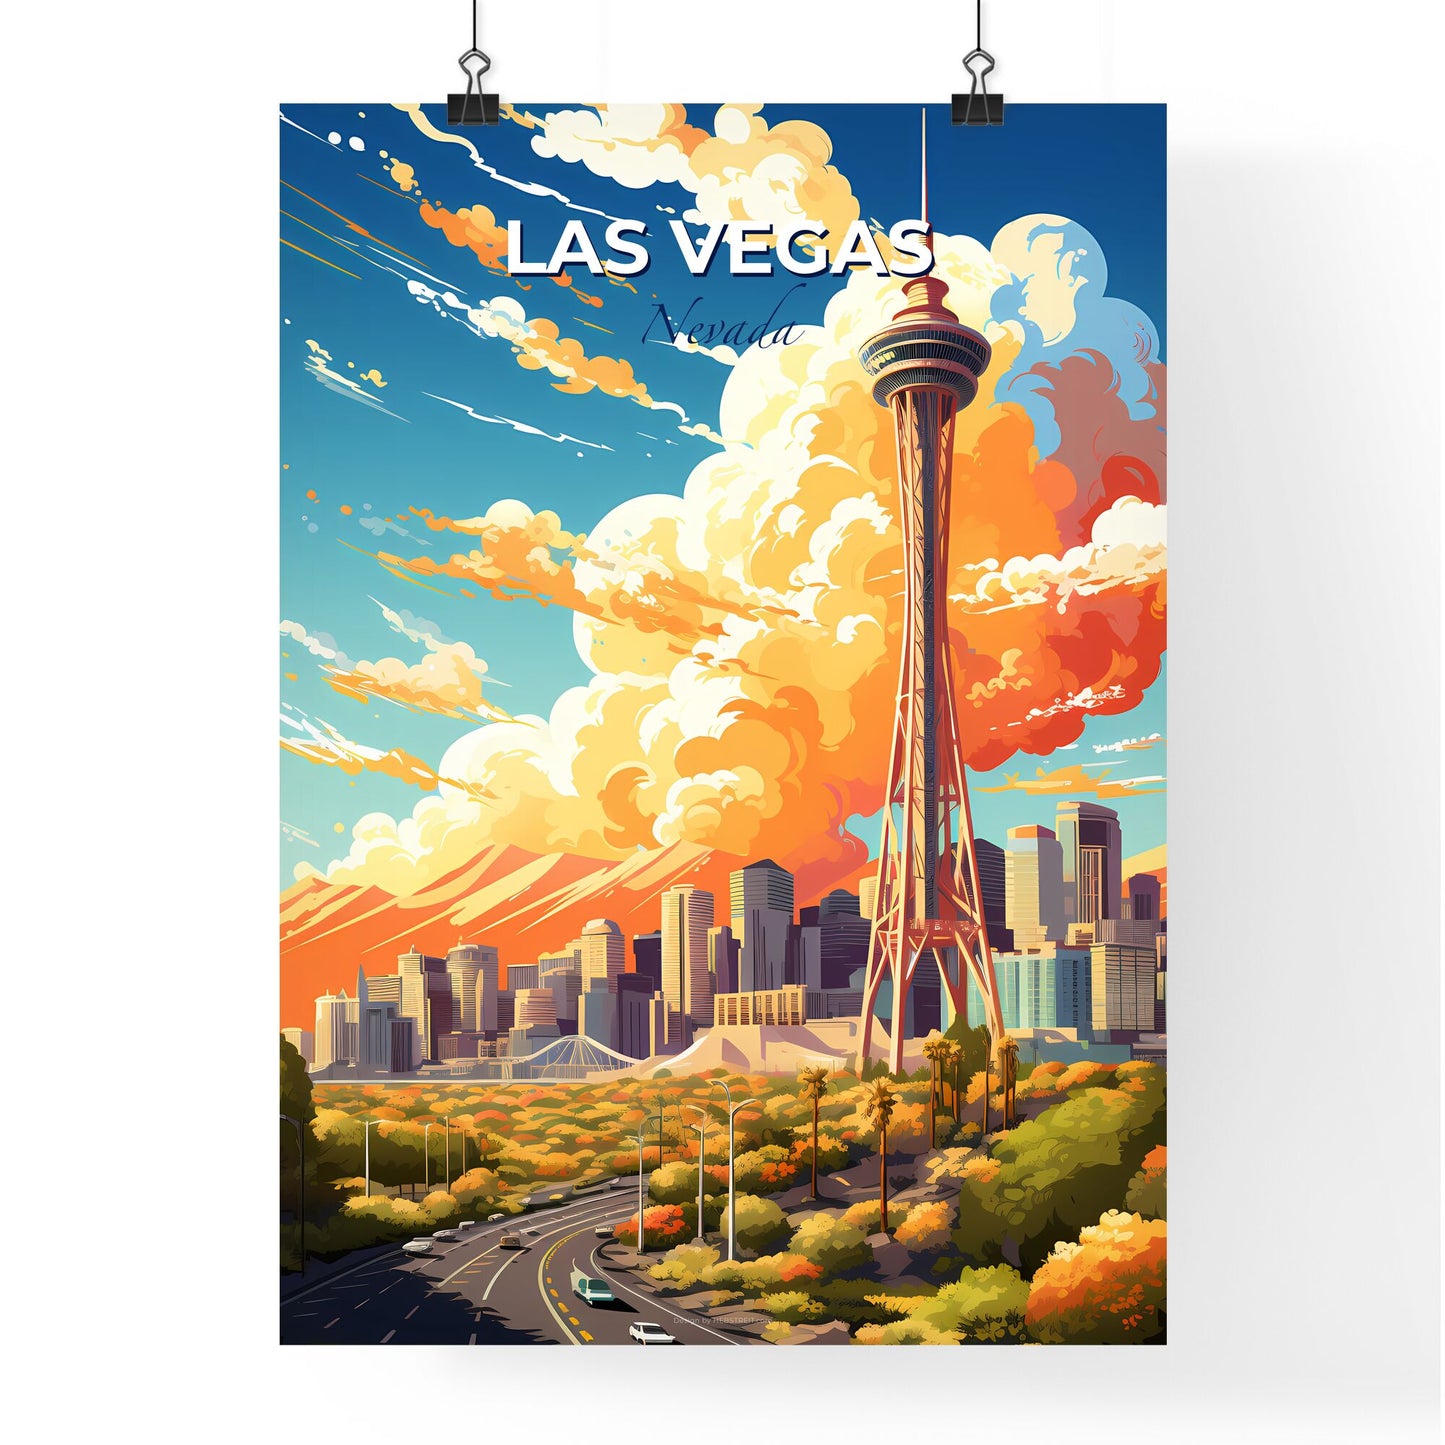 Las Vegas Nevada Skyline - A Tower In A City - Customizable Travel Gift Default Title